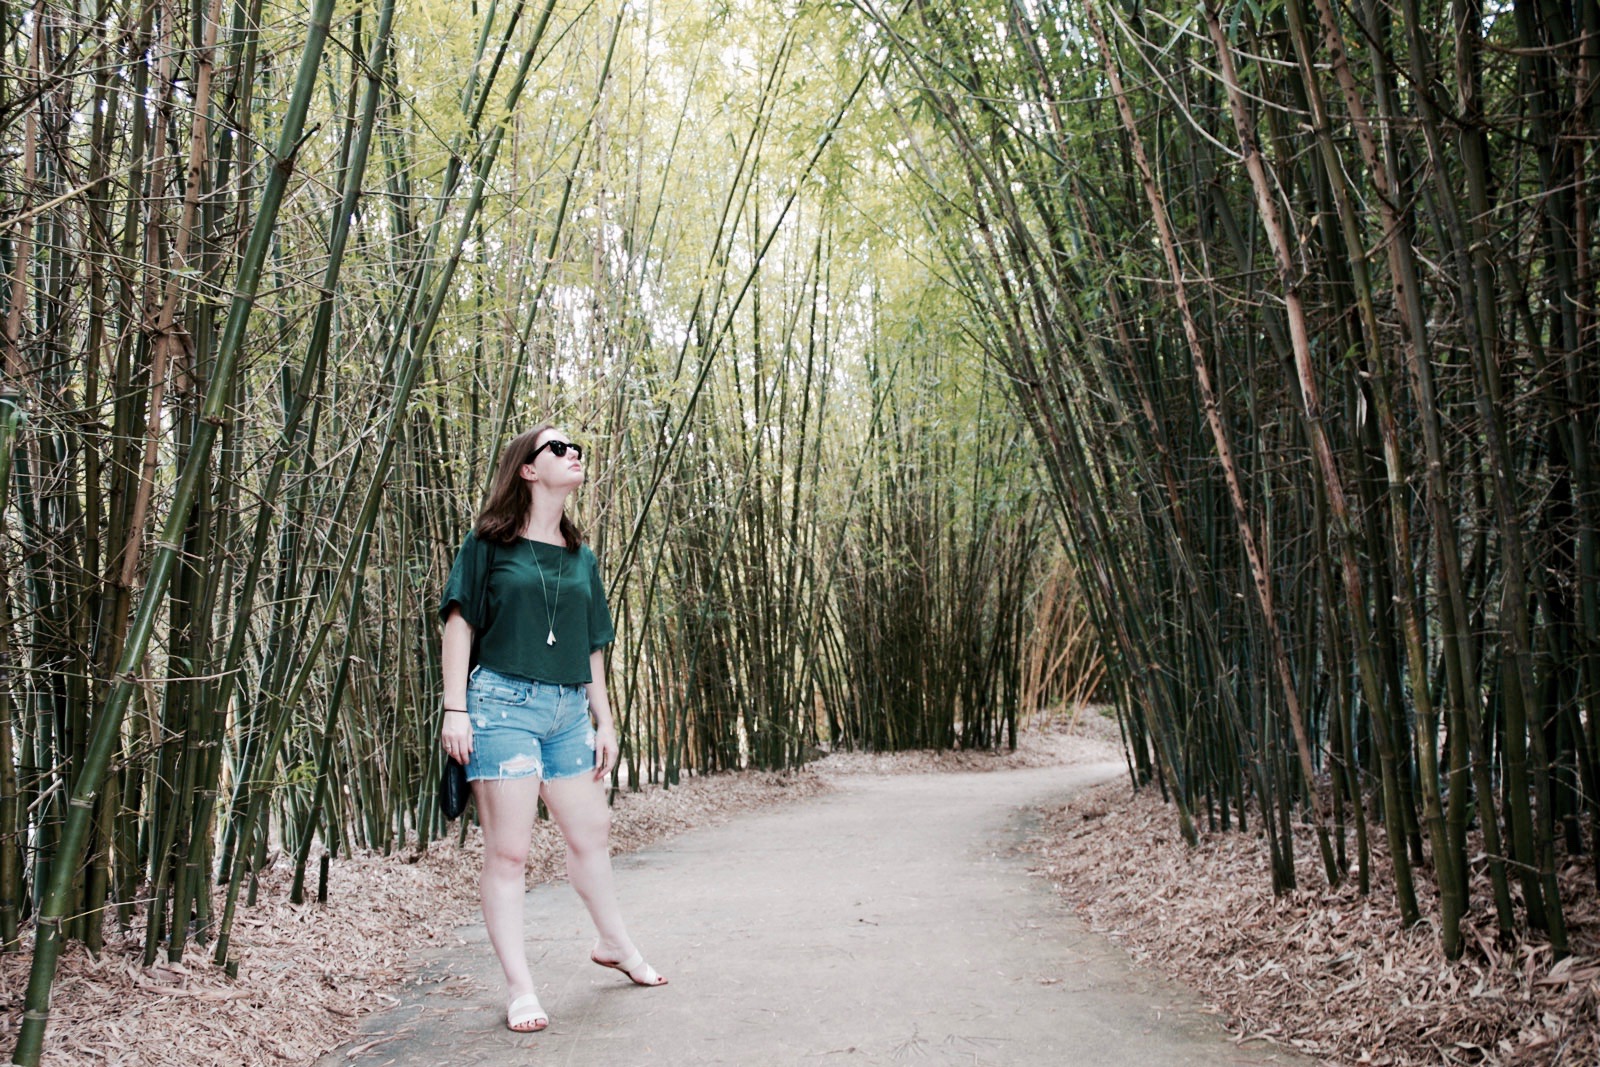 Alyssa stands in a bamboo garden at the Jacksonville Zoo